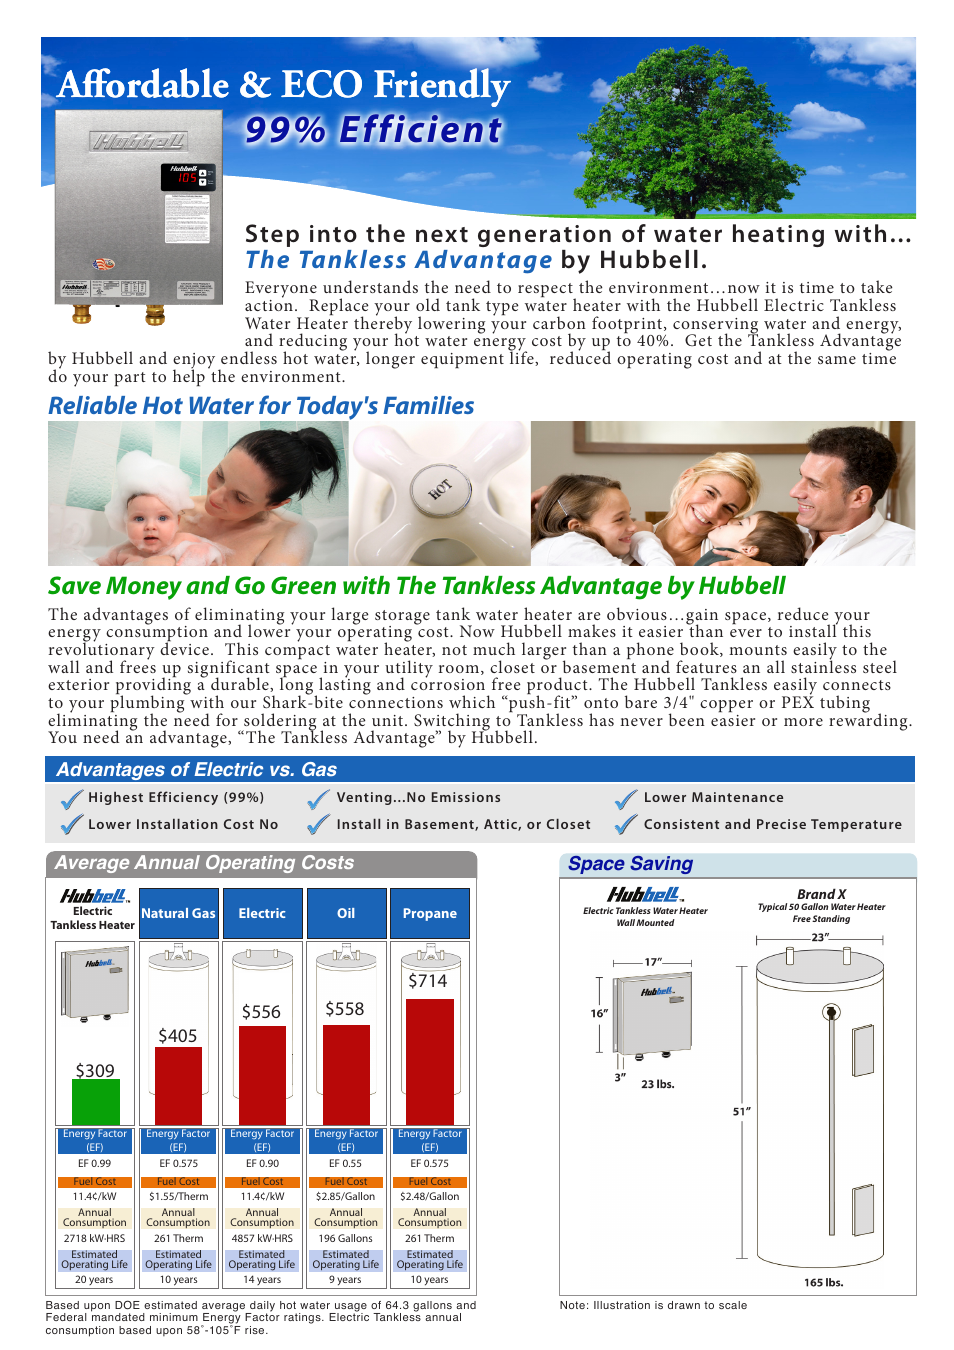 Affordable & eco friendly, 99% efficient, The tankless advantage by hubbell | Reliable hot water for today's families, Tep into the next generation of water heating with, Average annual operating costs, Advantages of electric vs. gas, Space saving | Hubbell Electric Heater Company 280-3 27 kW User Manual | Page 2 / 6